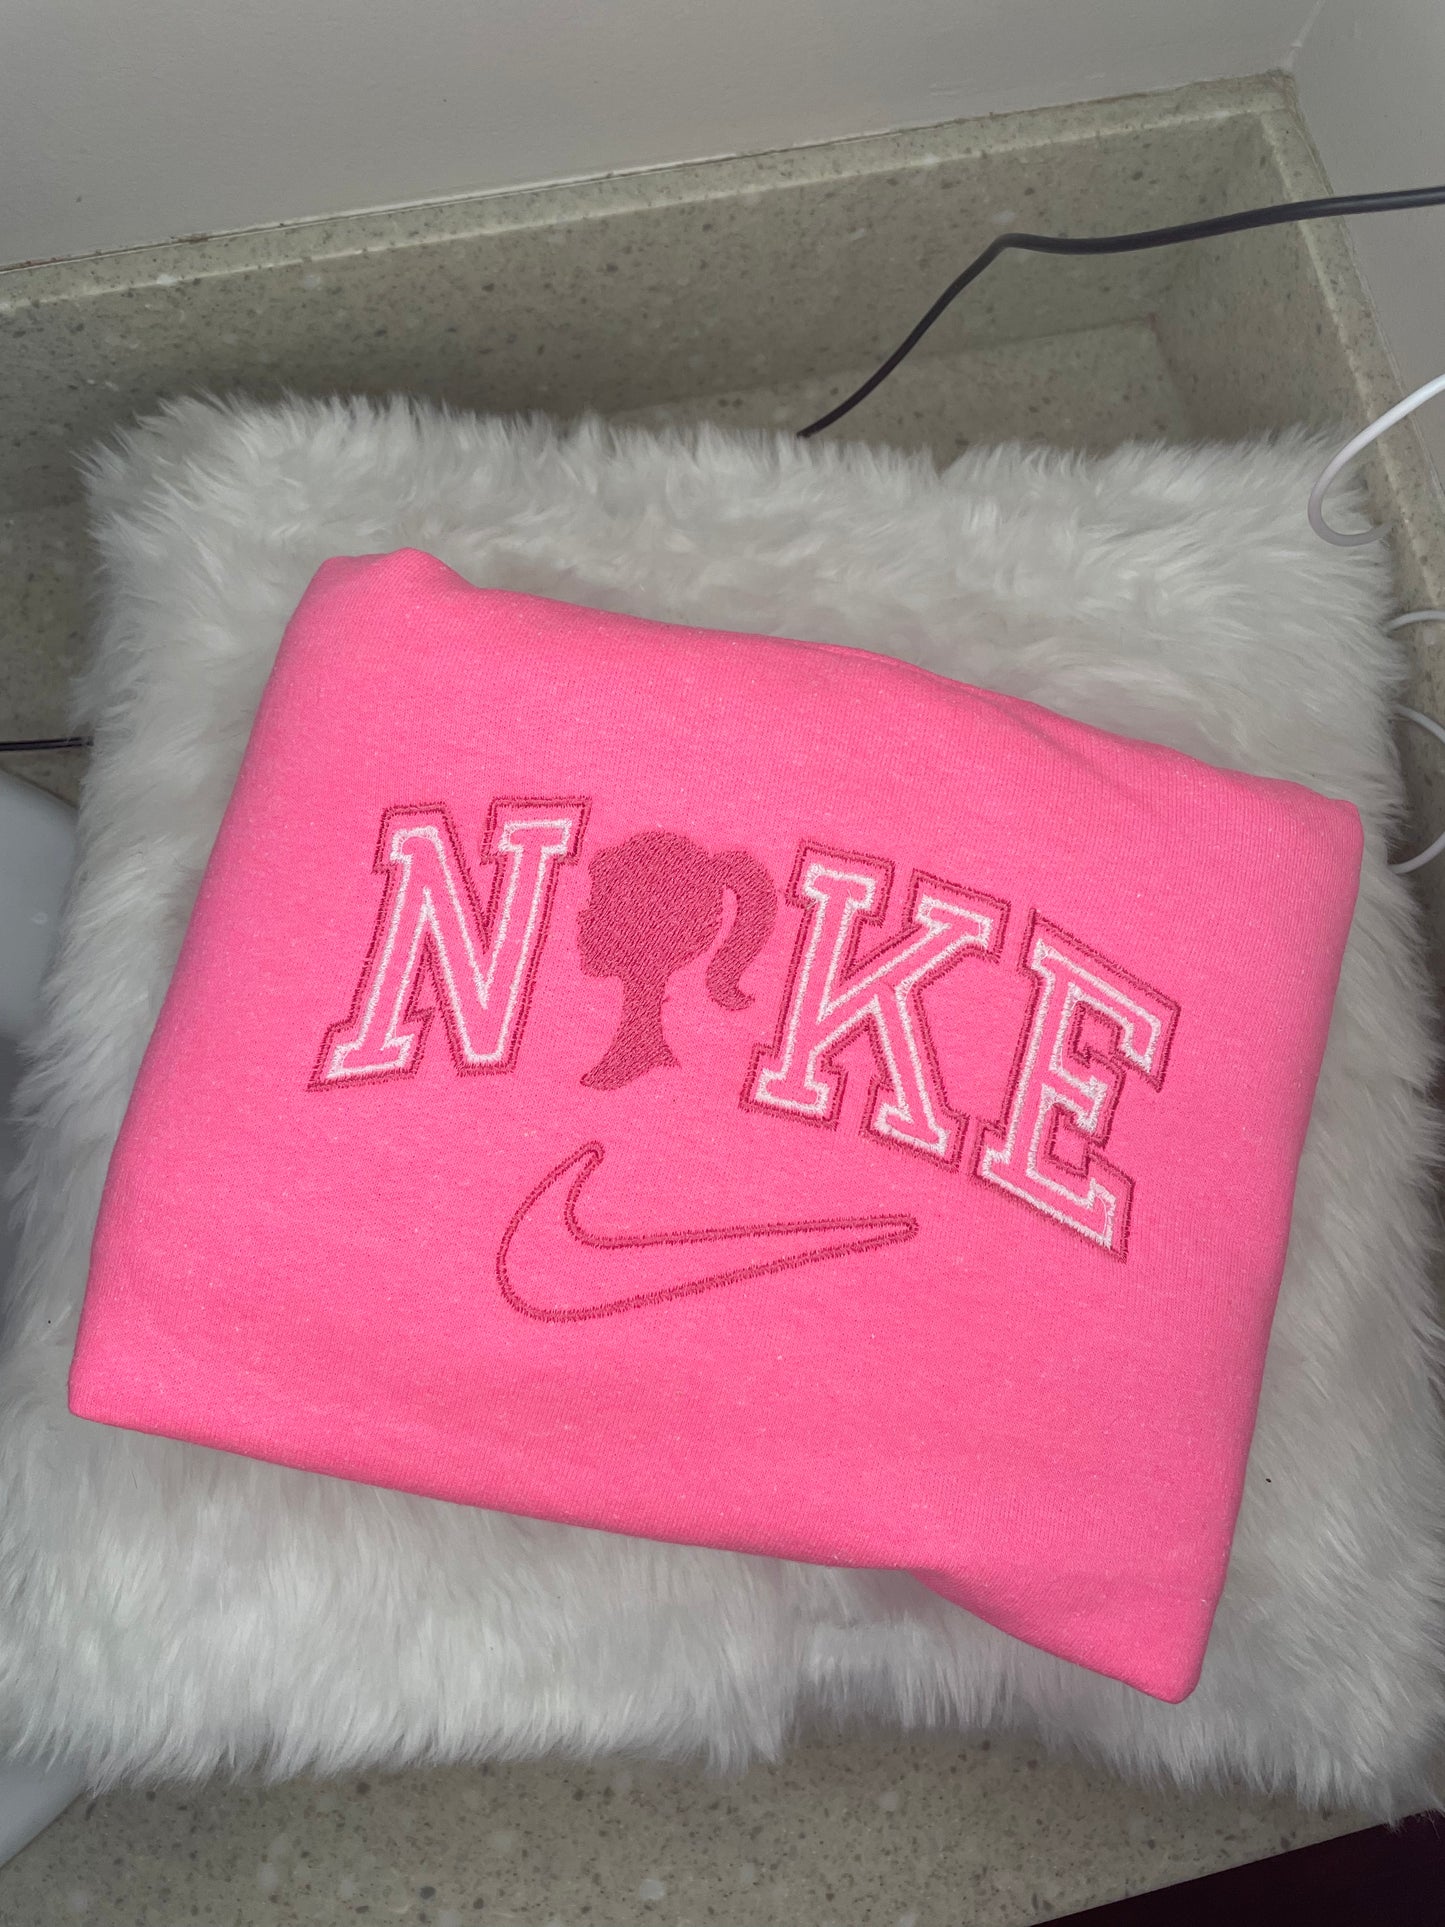 “NIKE” Barbie embroidered sweater